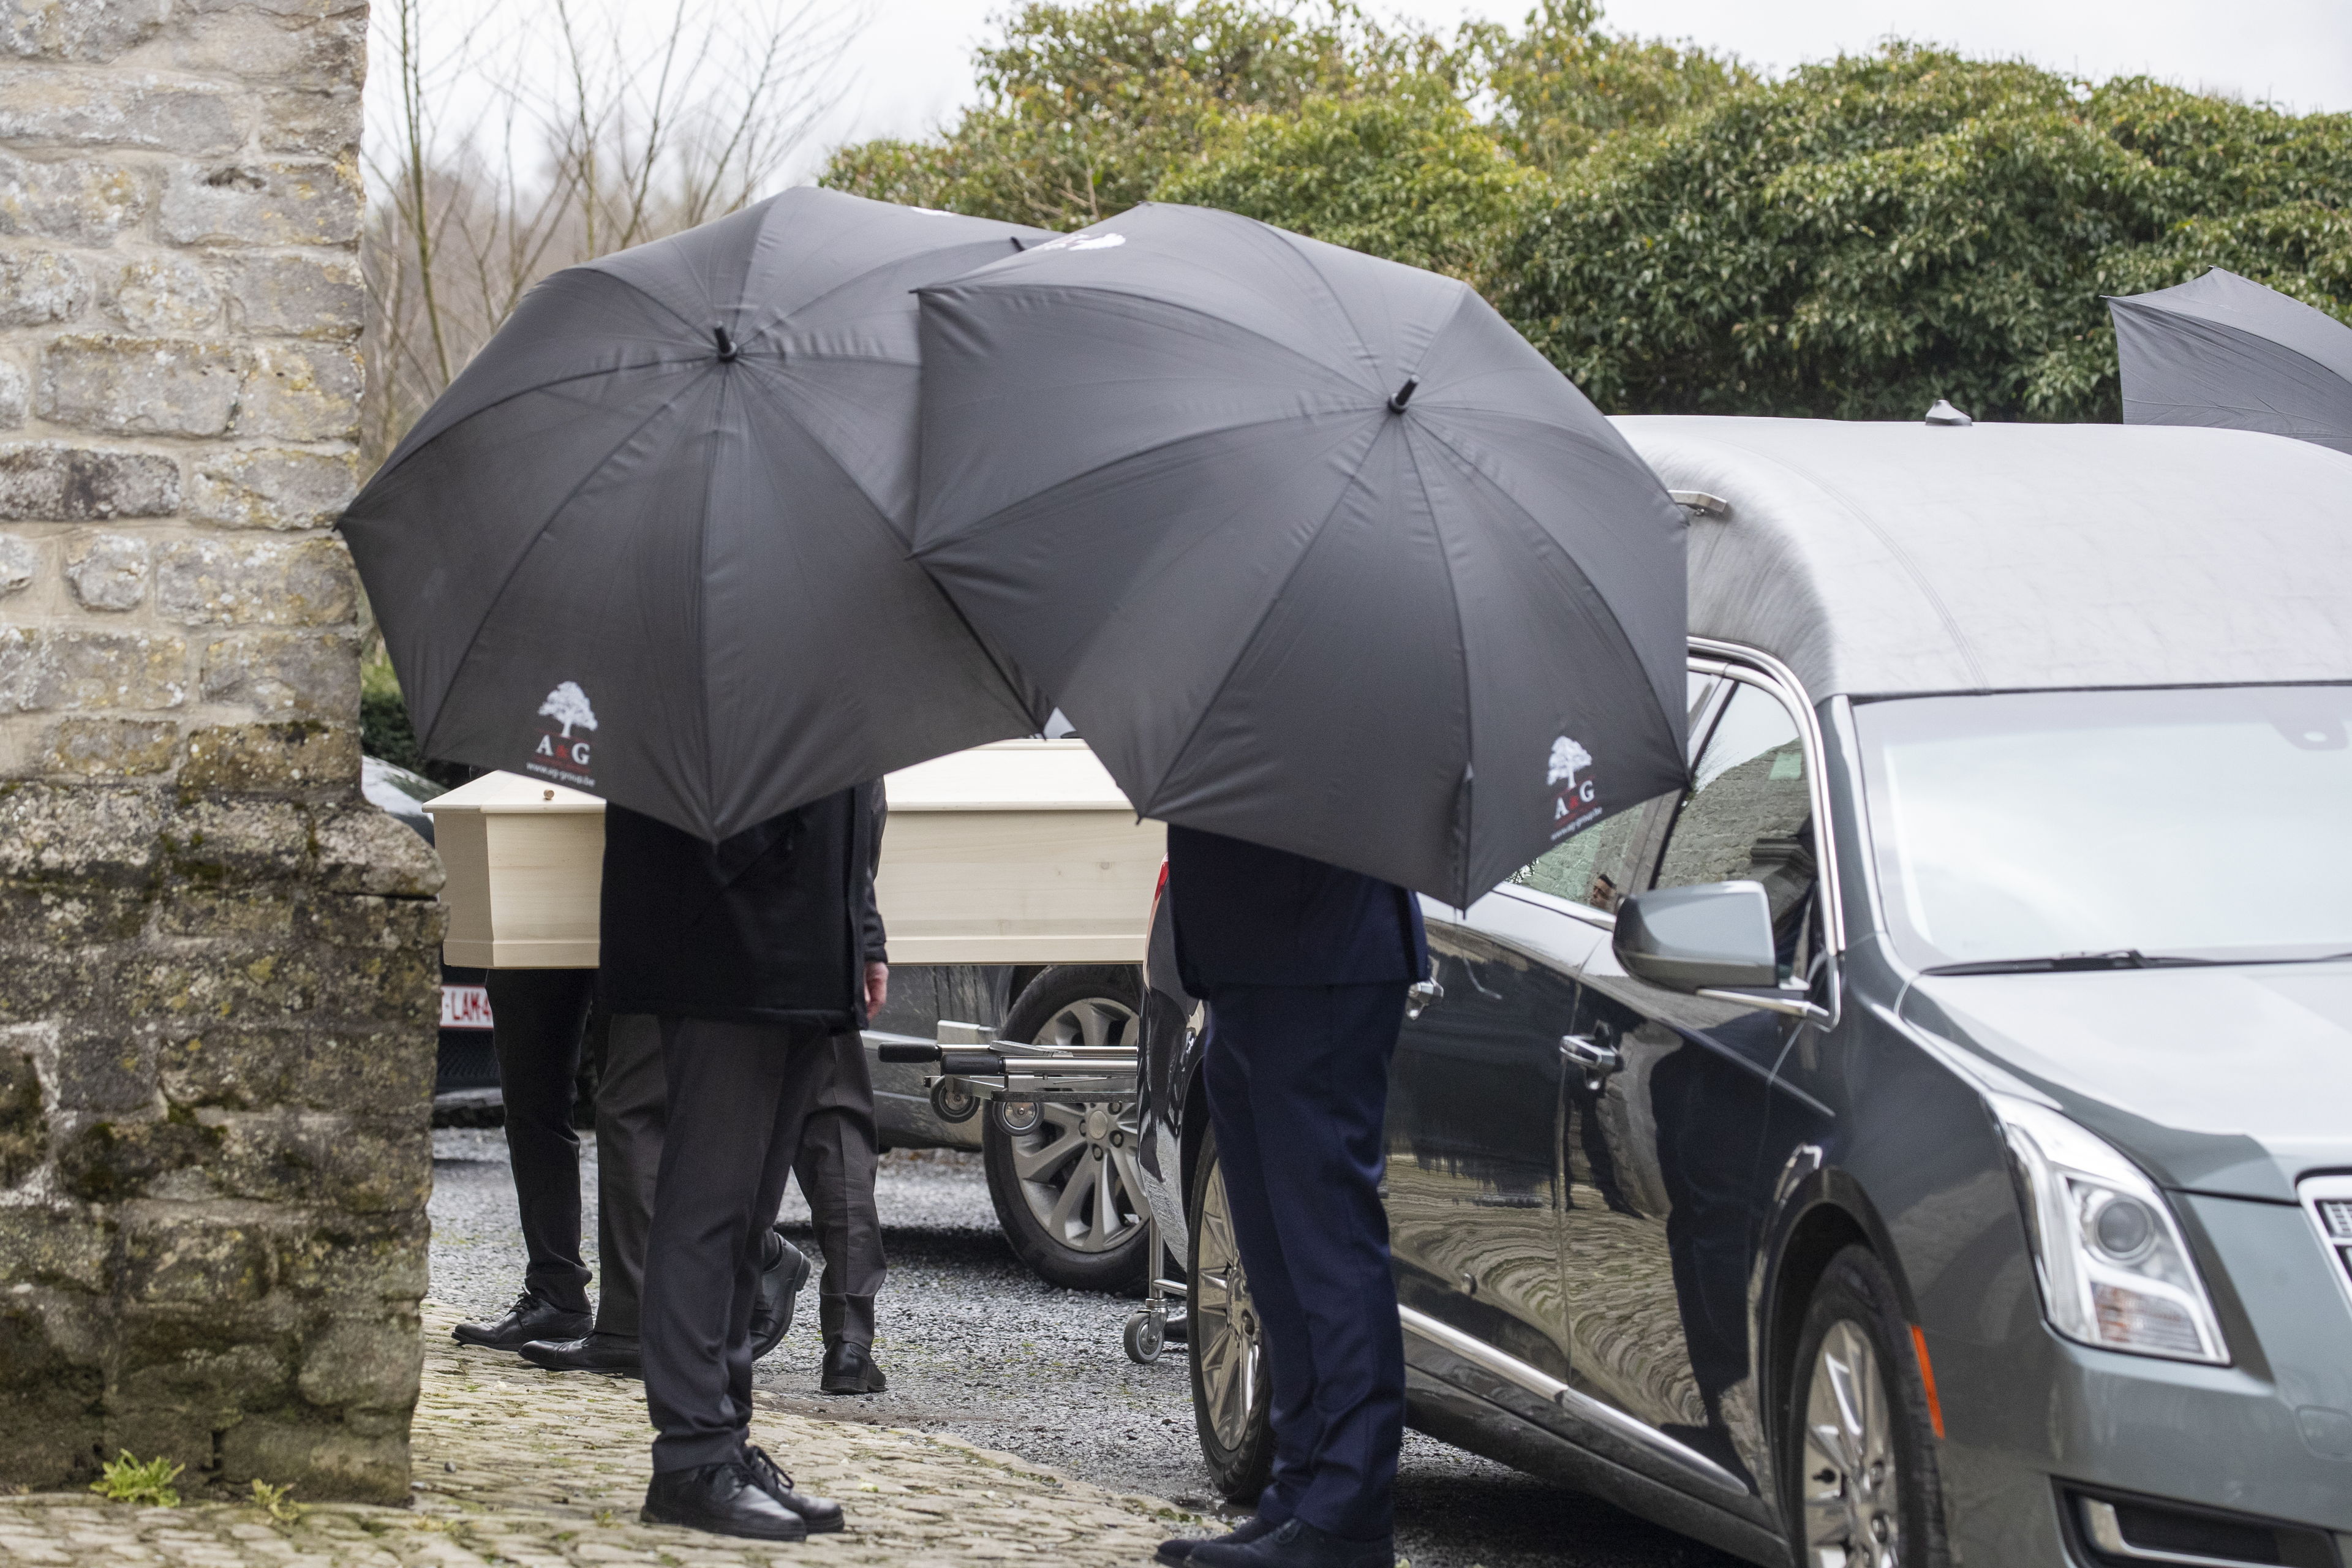 Funeral industry benefits most from expansion of flexi-jobs to other sectors